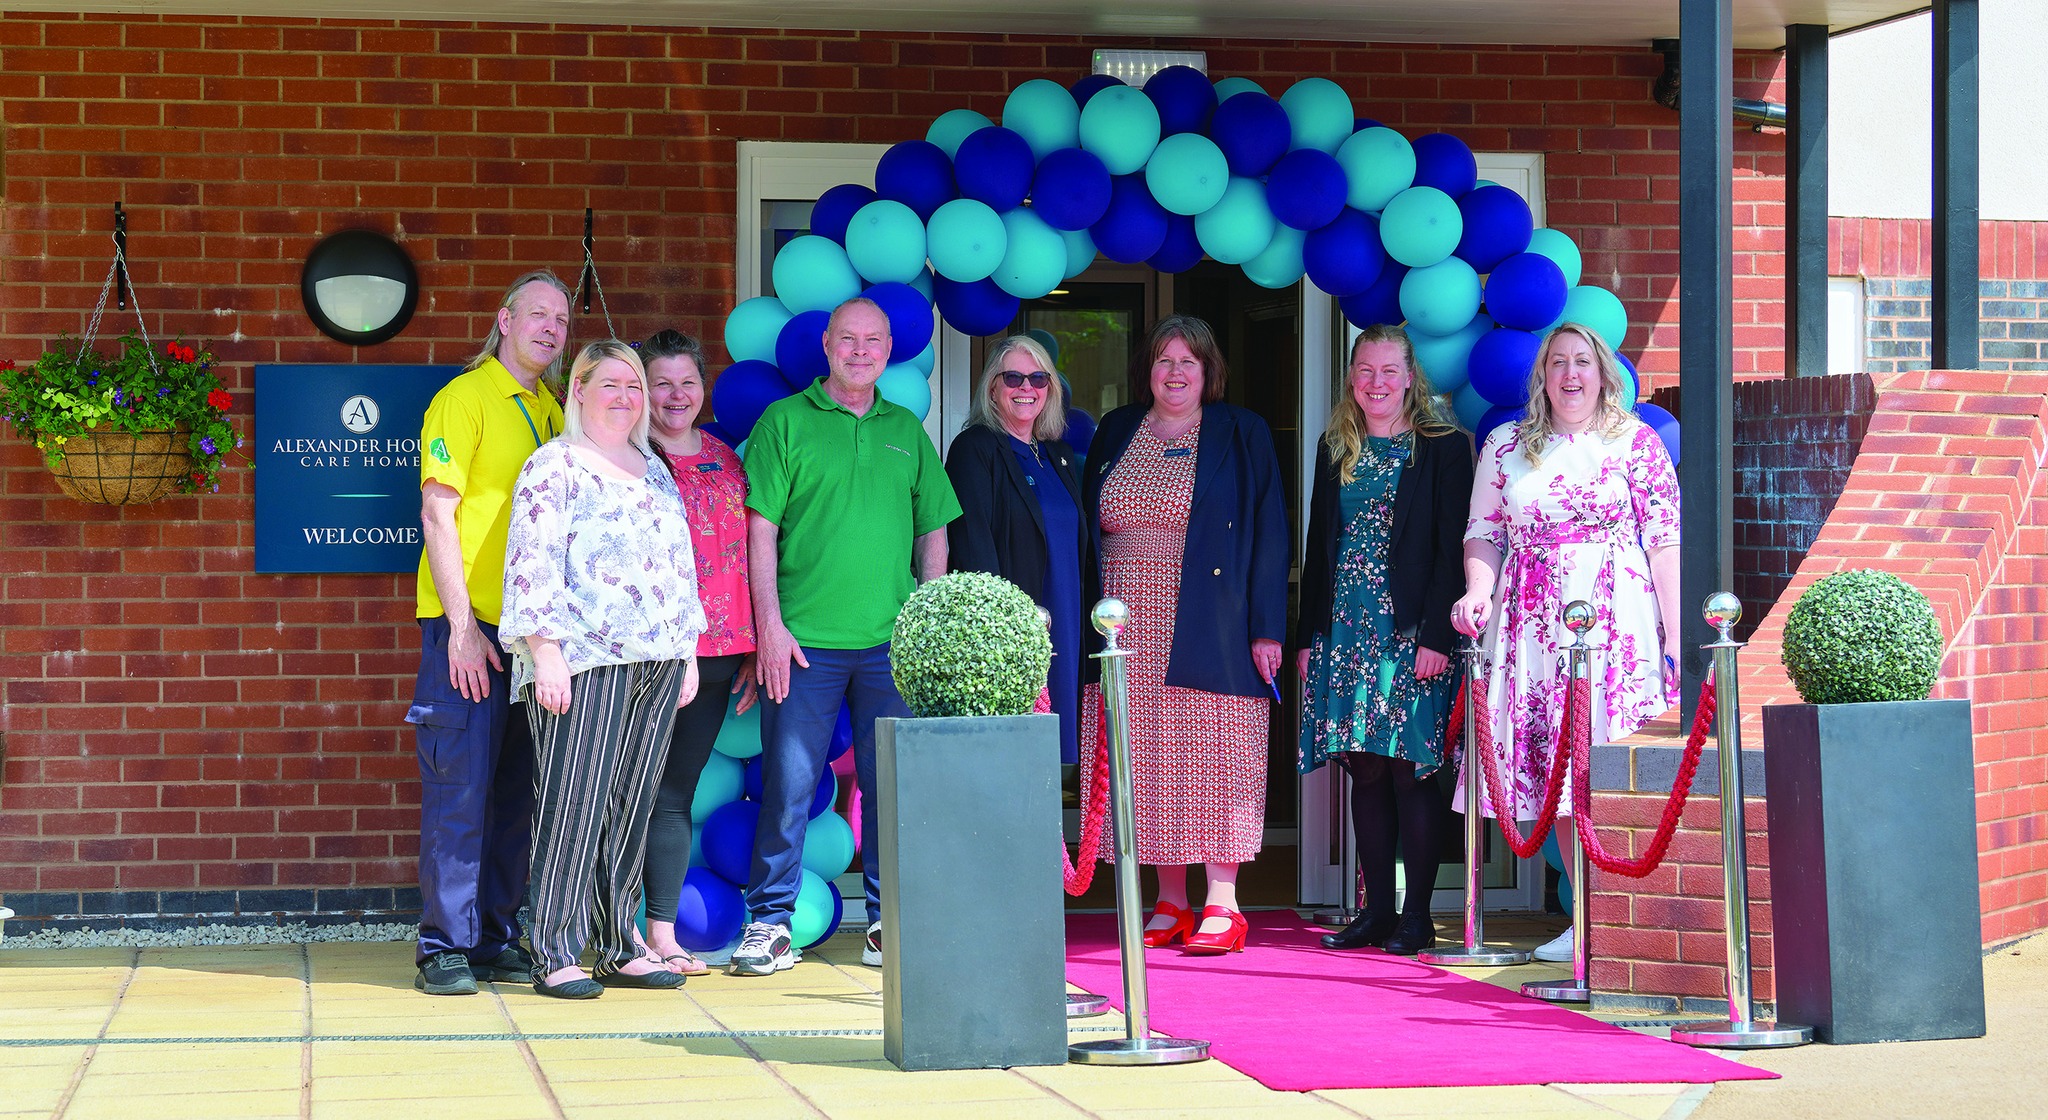 Six females and two males smiling in front of a light blue and dark blue balloon arch with a red carpet.